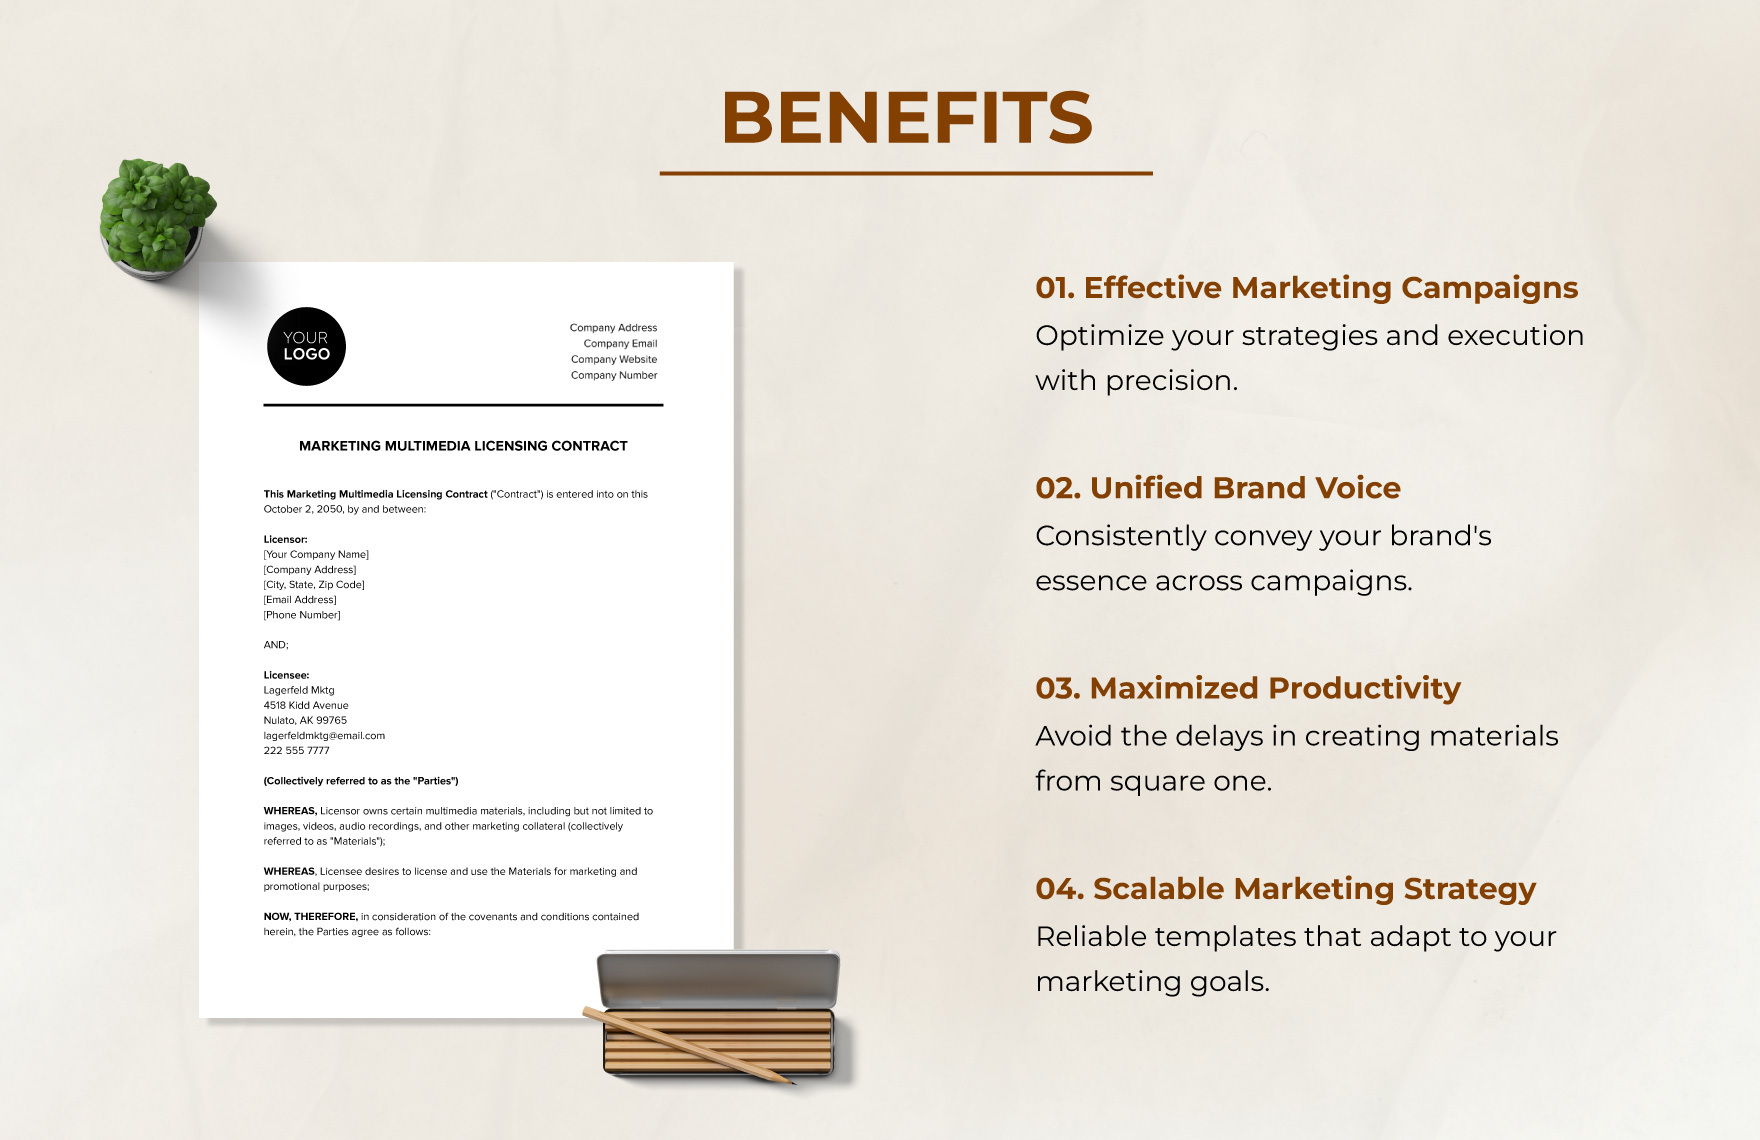 Marketing Multimedia Licensing Contract Template